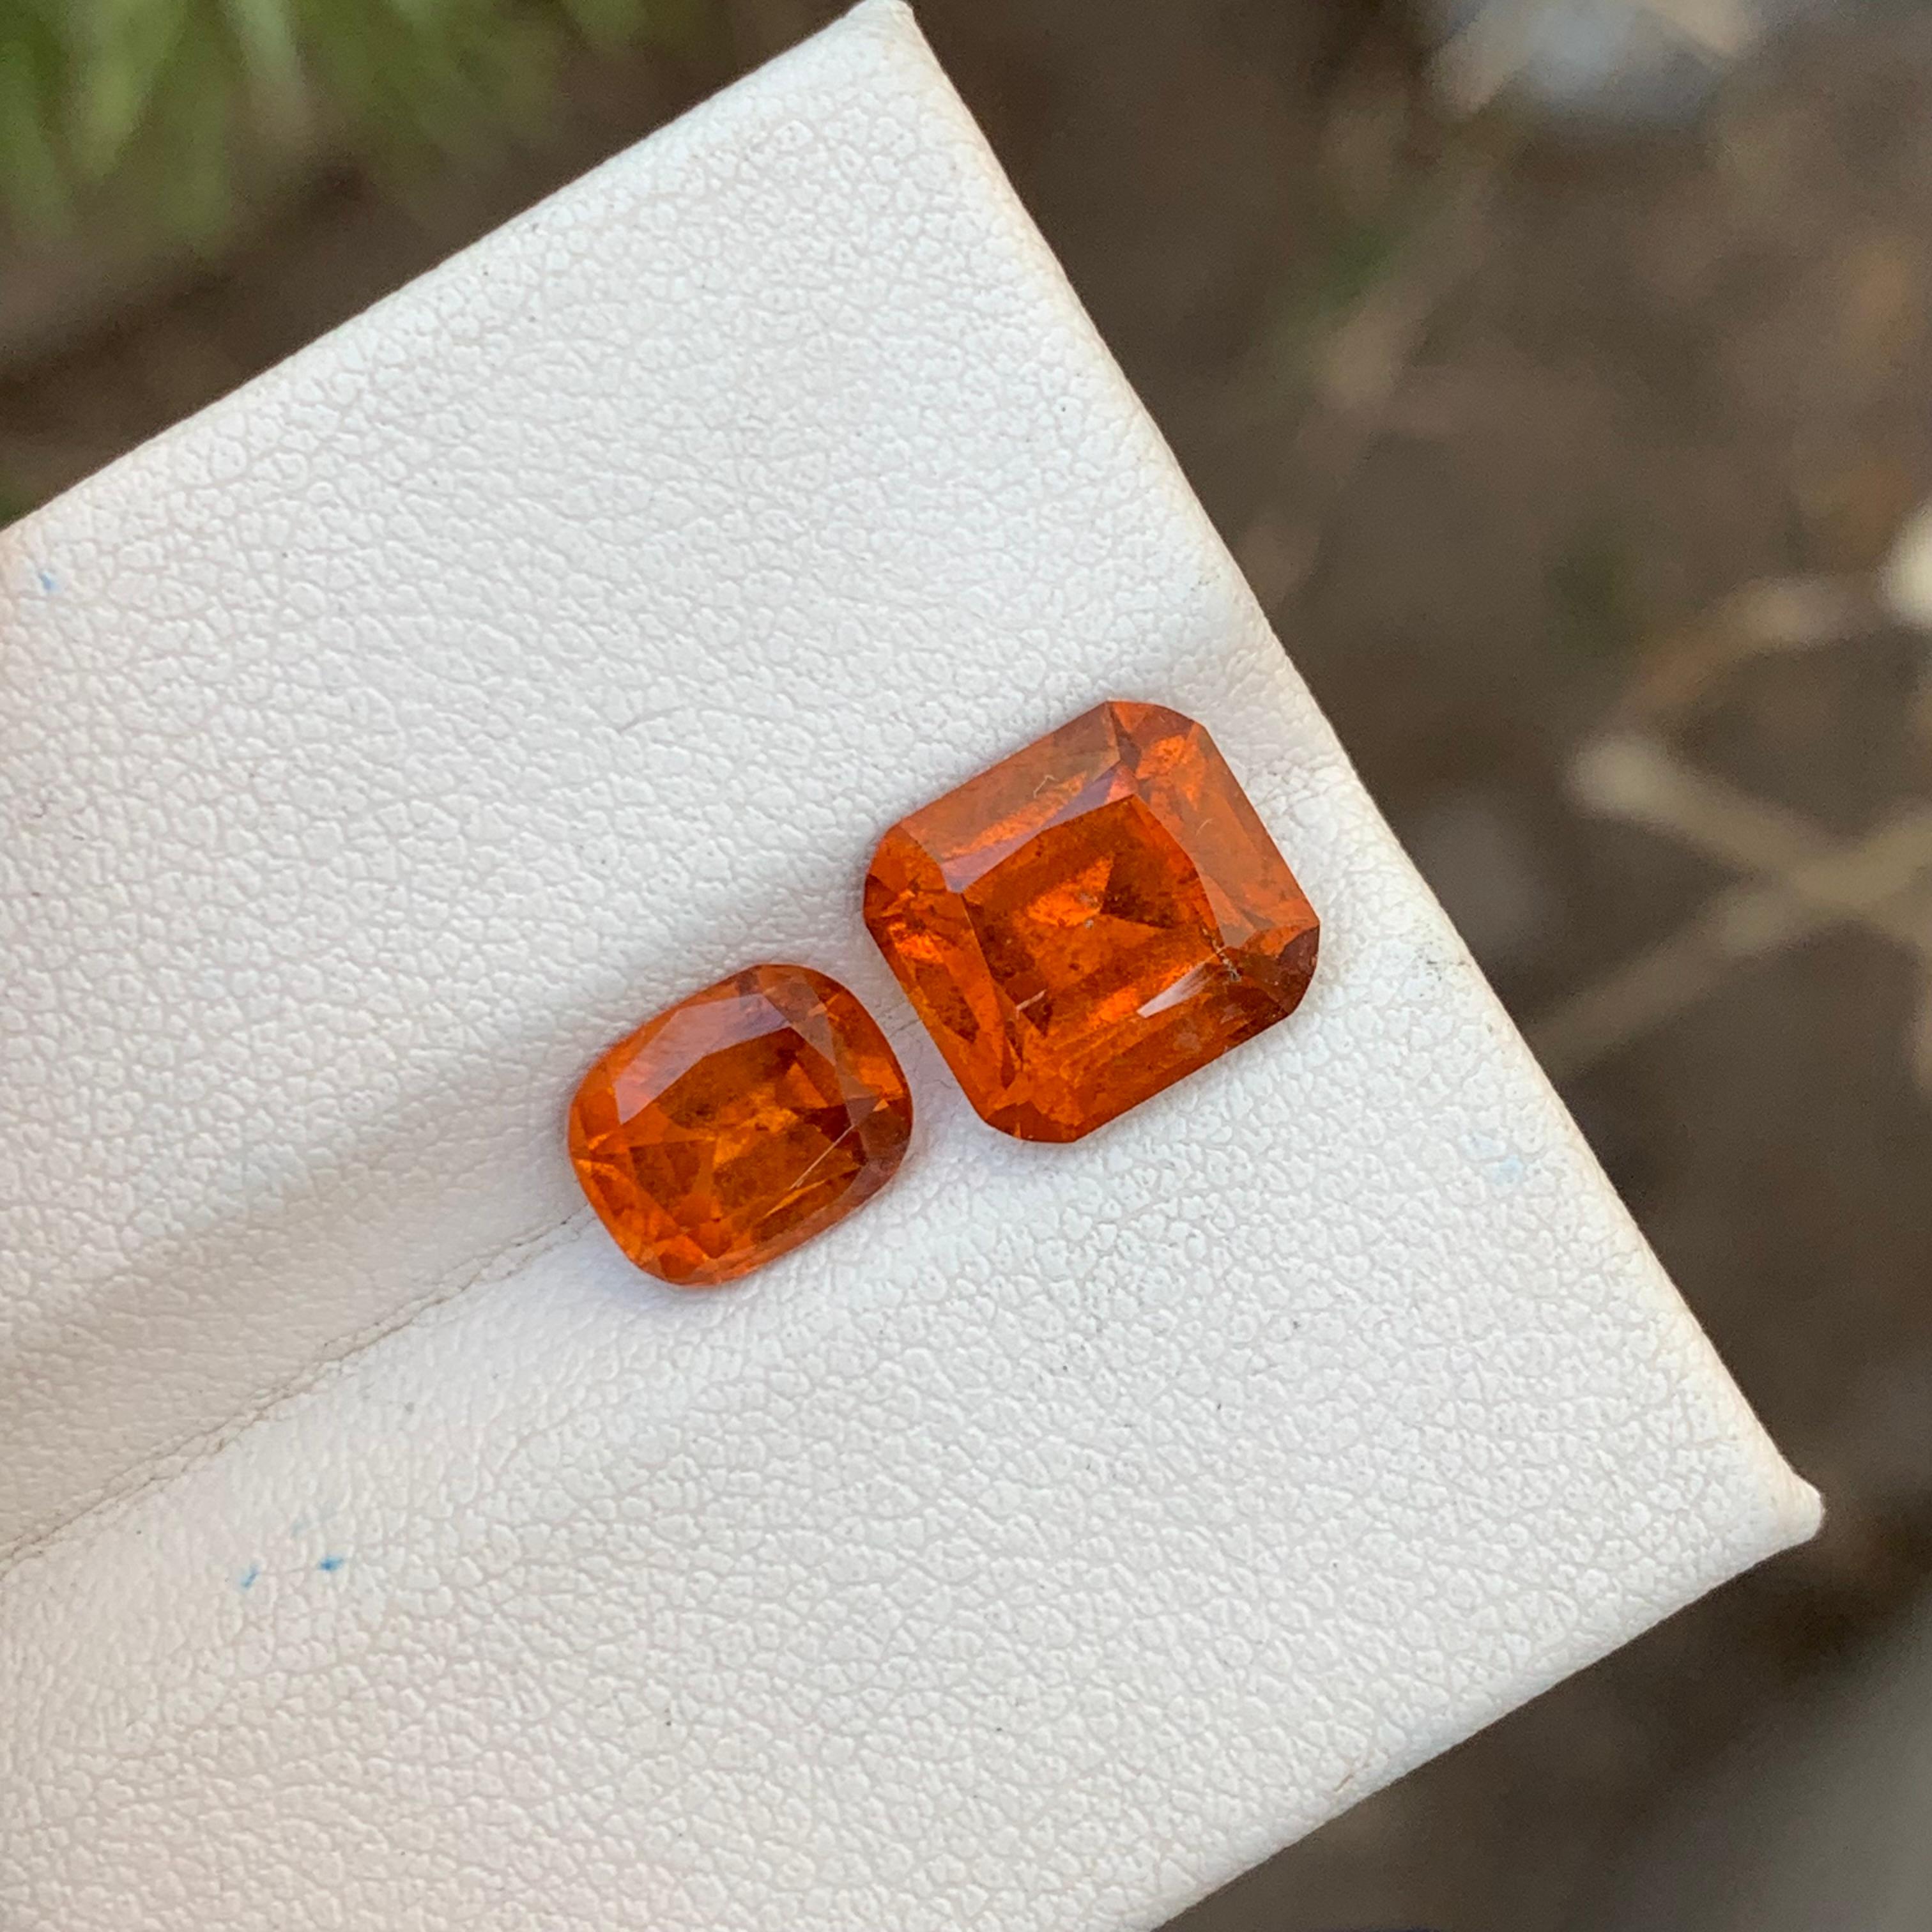 5.95 Carats Natural Loose Hessonite Garnet 2 Pieces For Ring Jewelry Making  en vente 6